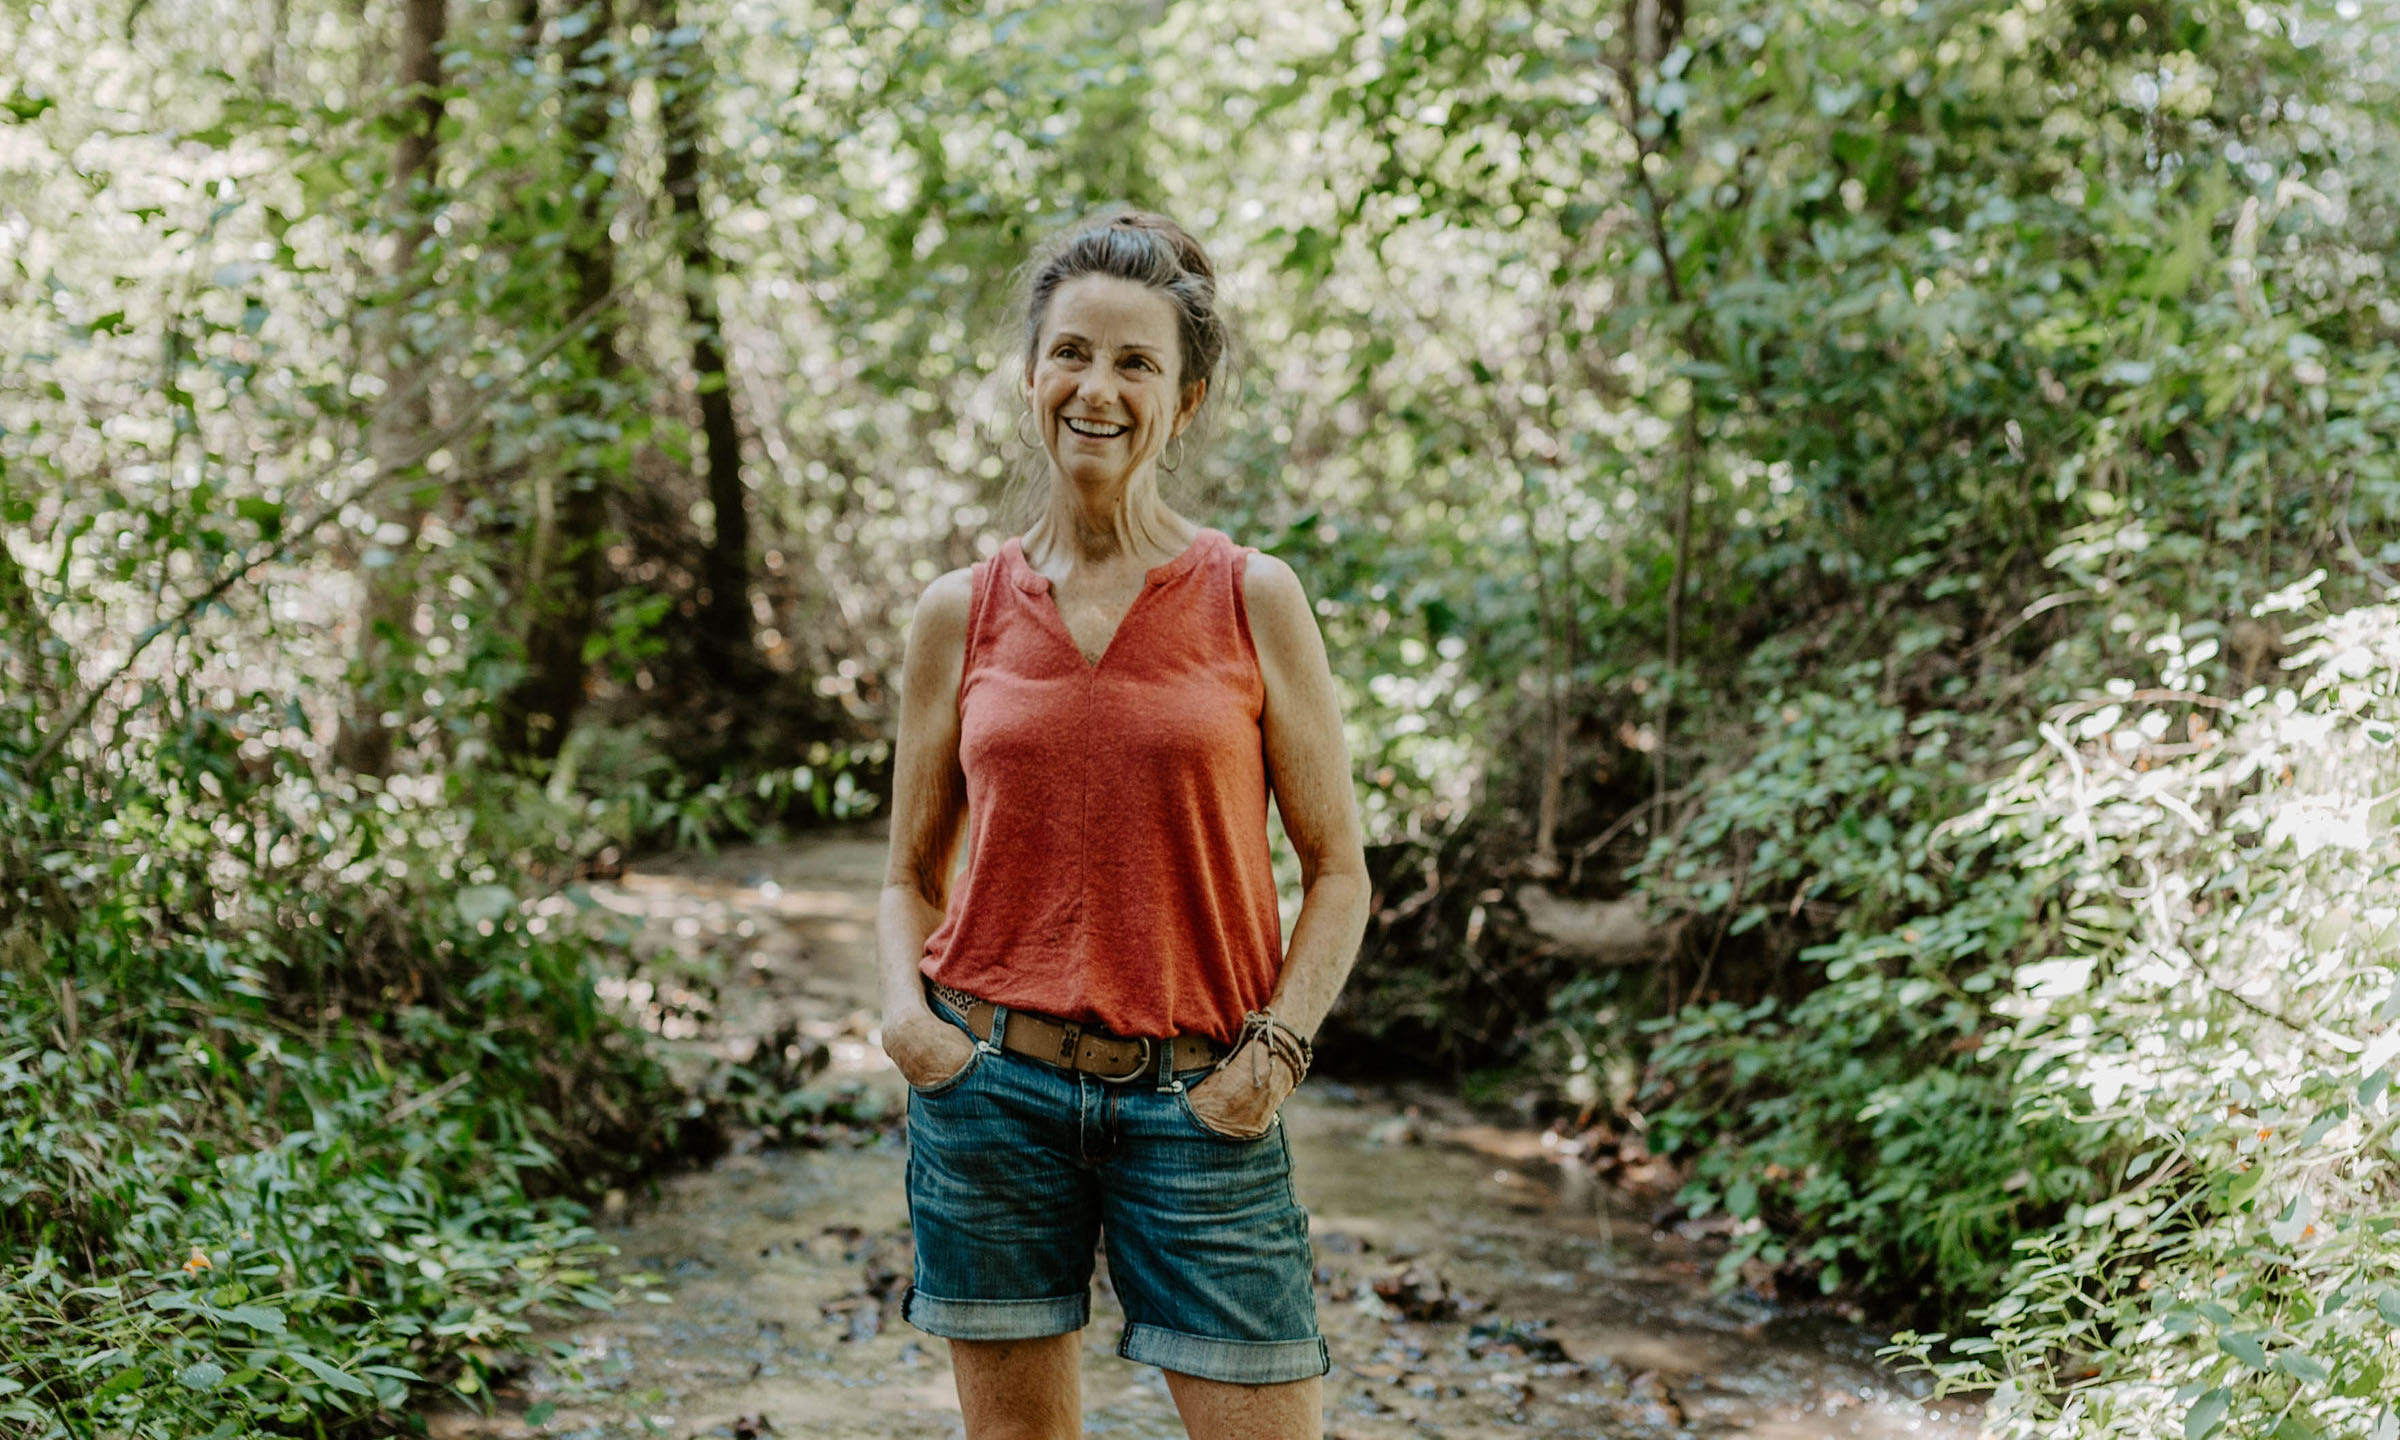 Shelly Smith is a nature-based counselor in Pickens County. Photo by Morgan Yelton